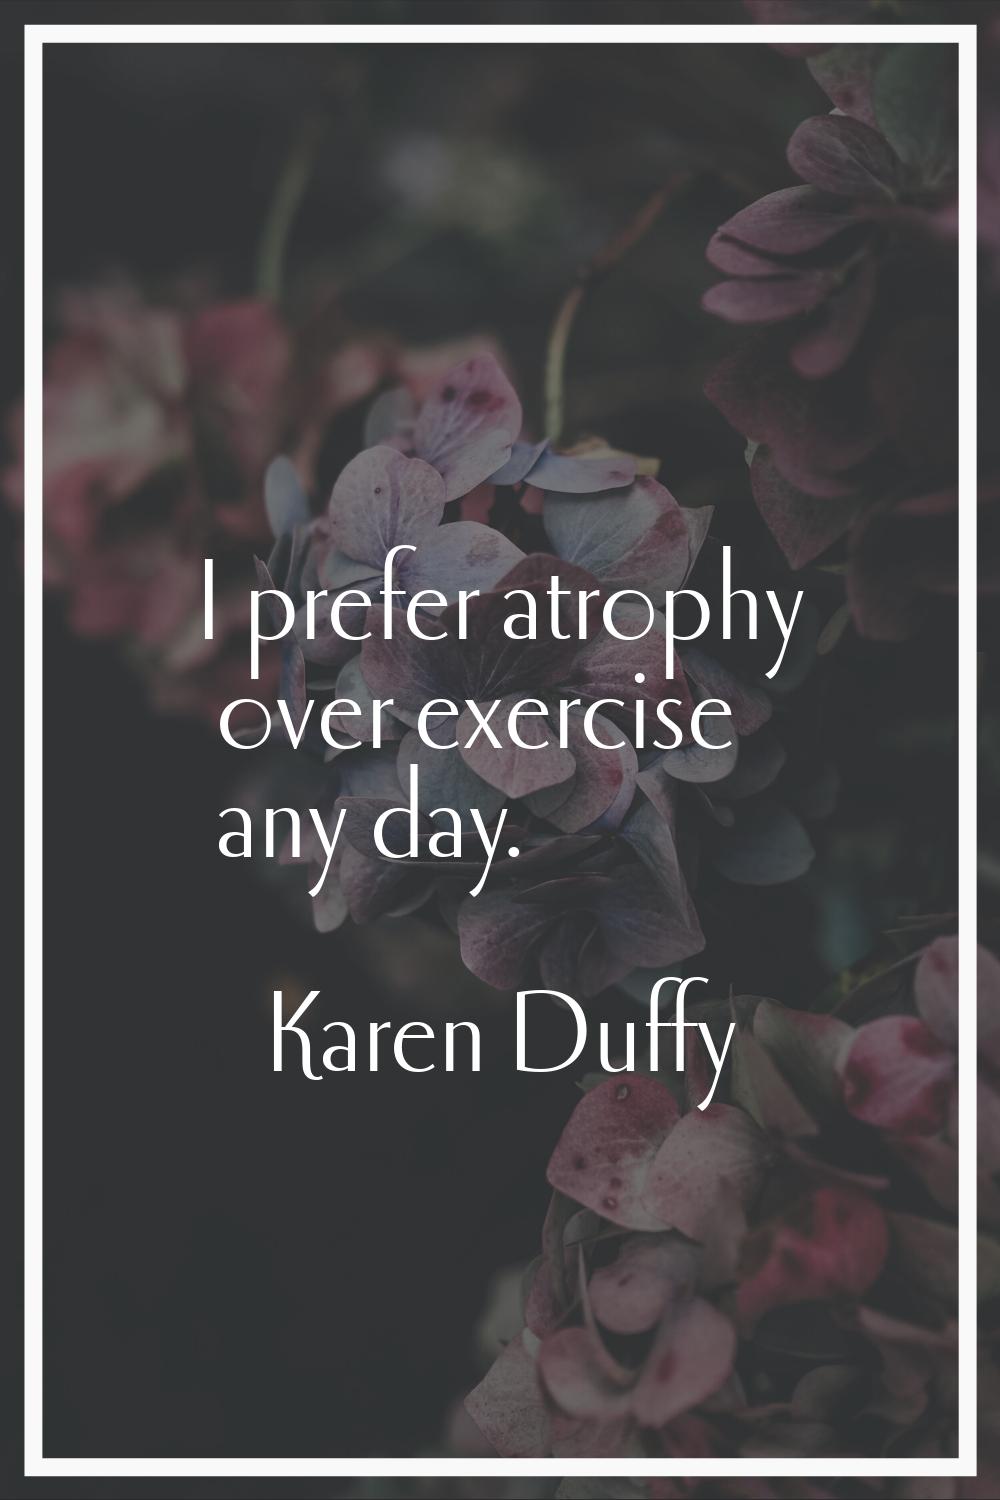 I prefer atrophy over exercise any day.